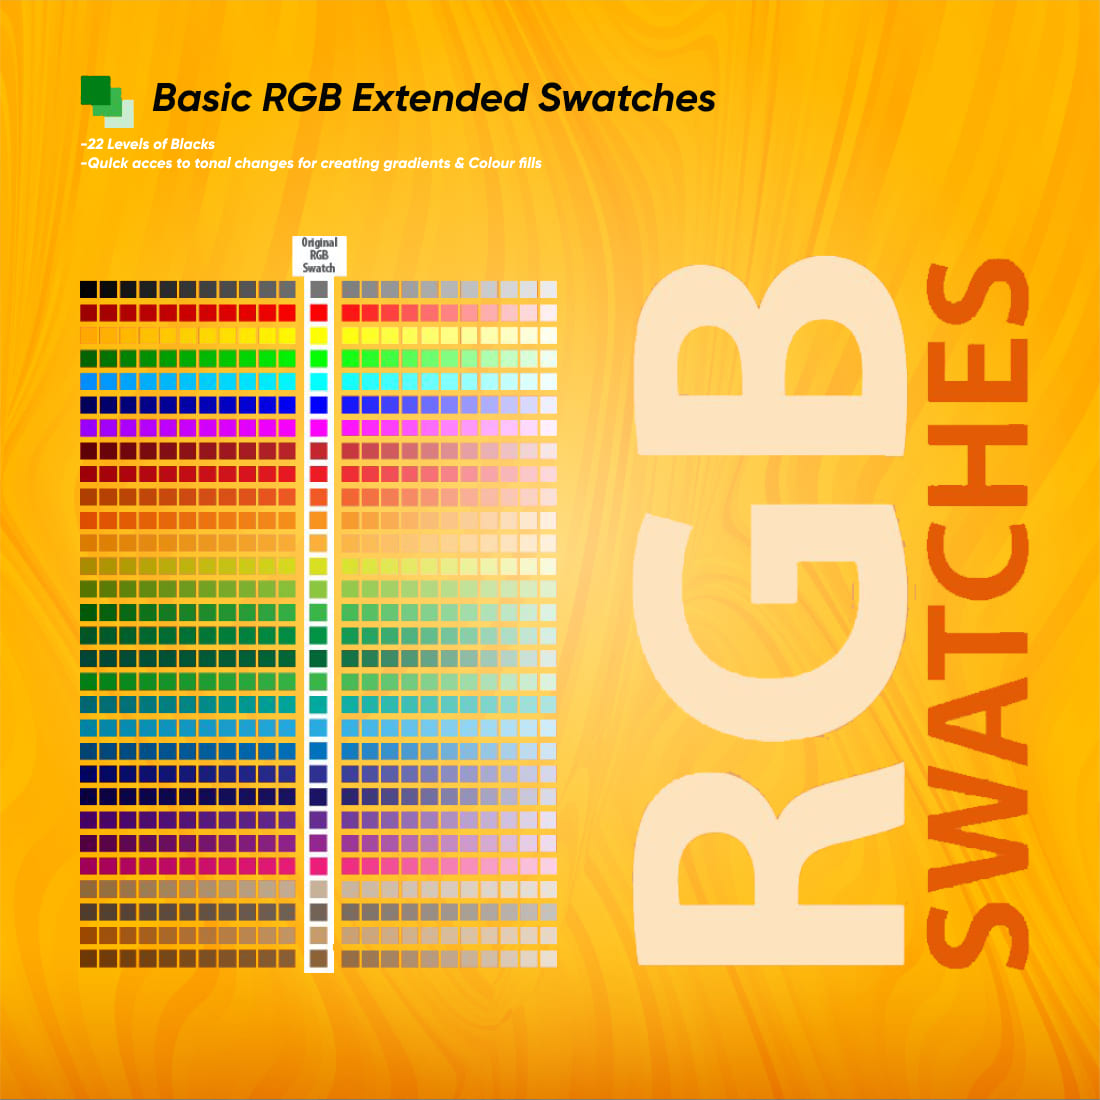 rgb extended swatches illustrator cover image.